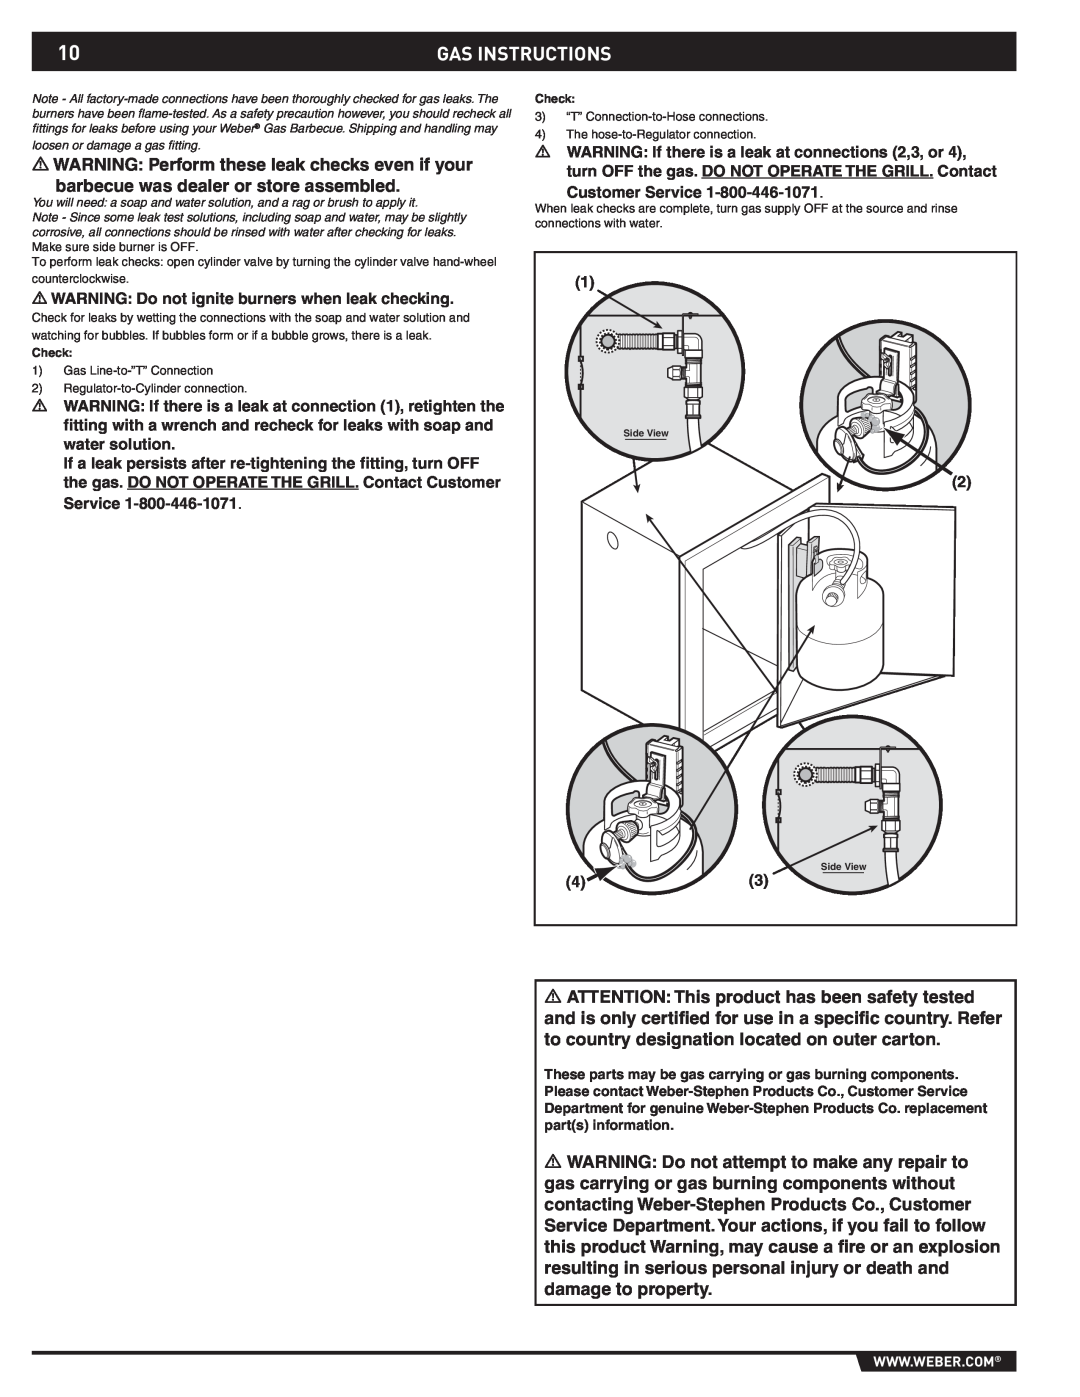 Summit 43176 manual Gas Instructions, WARNING Do not ignite burners when leak checking 